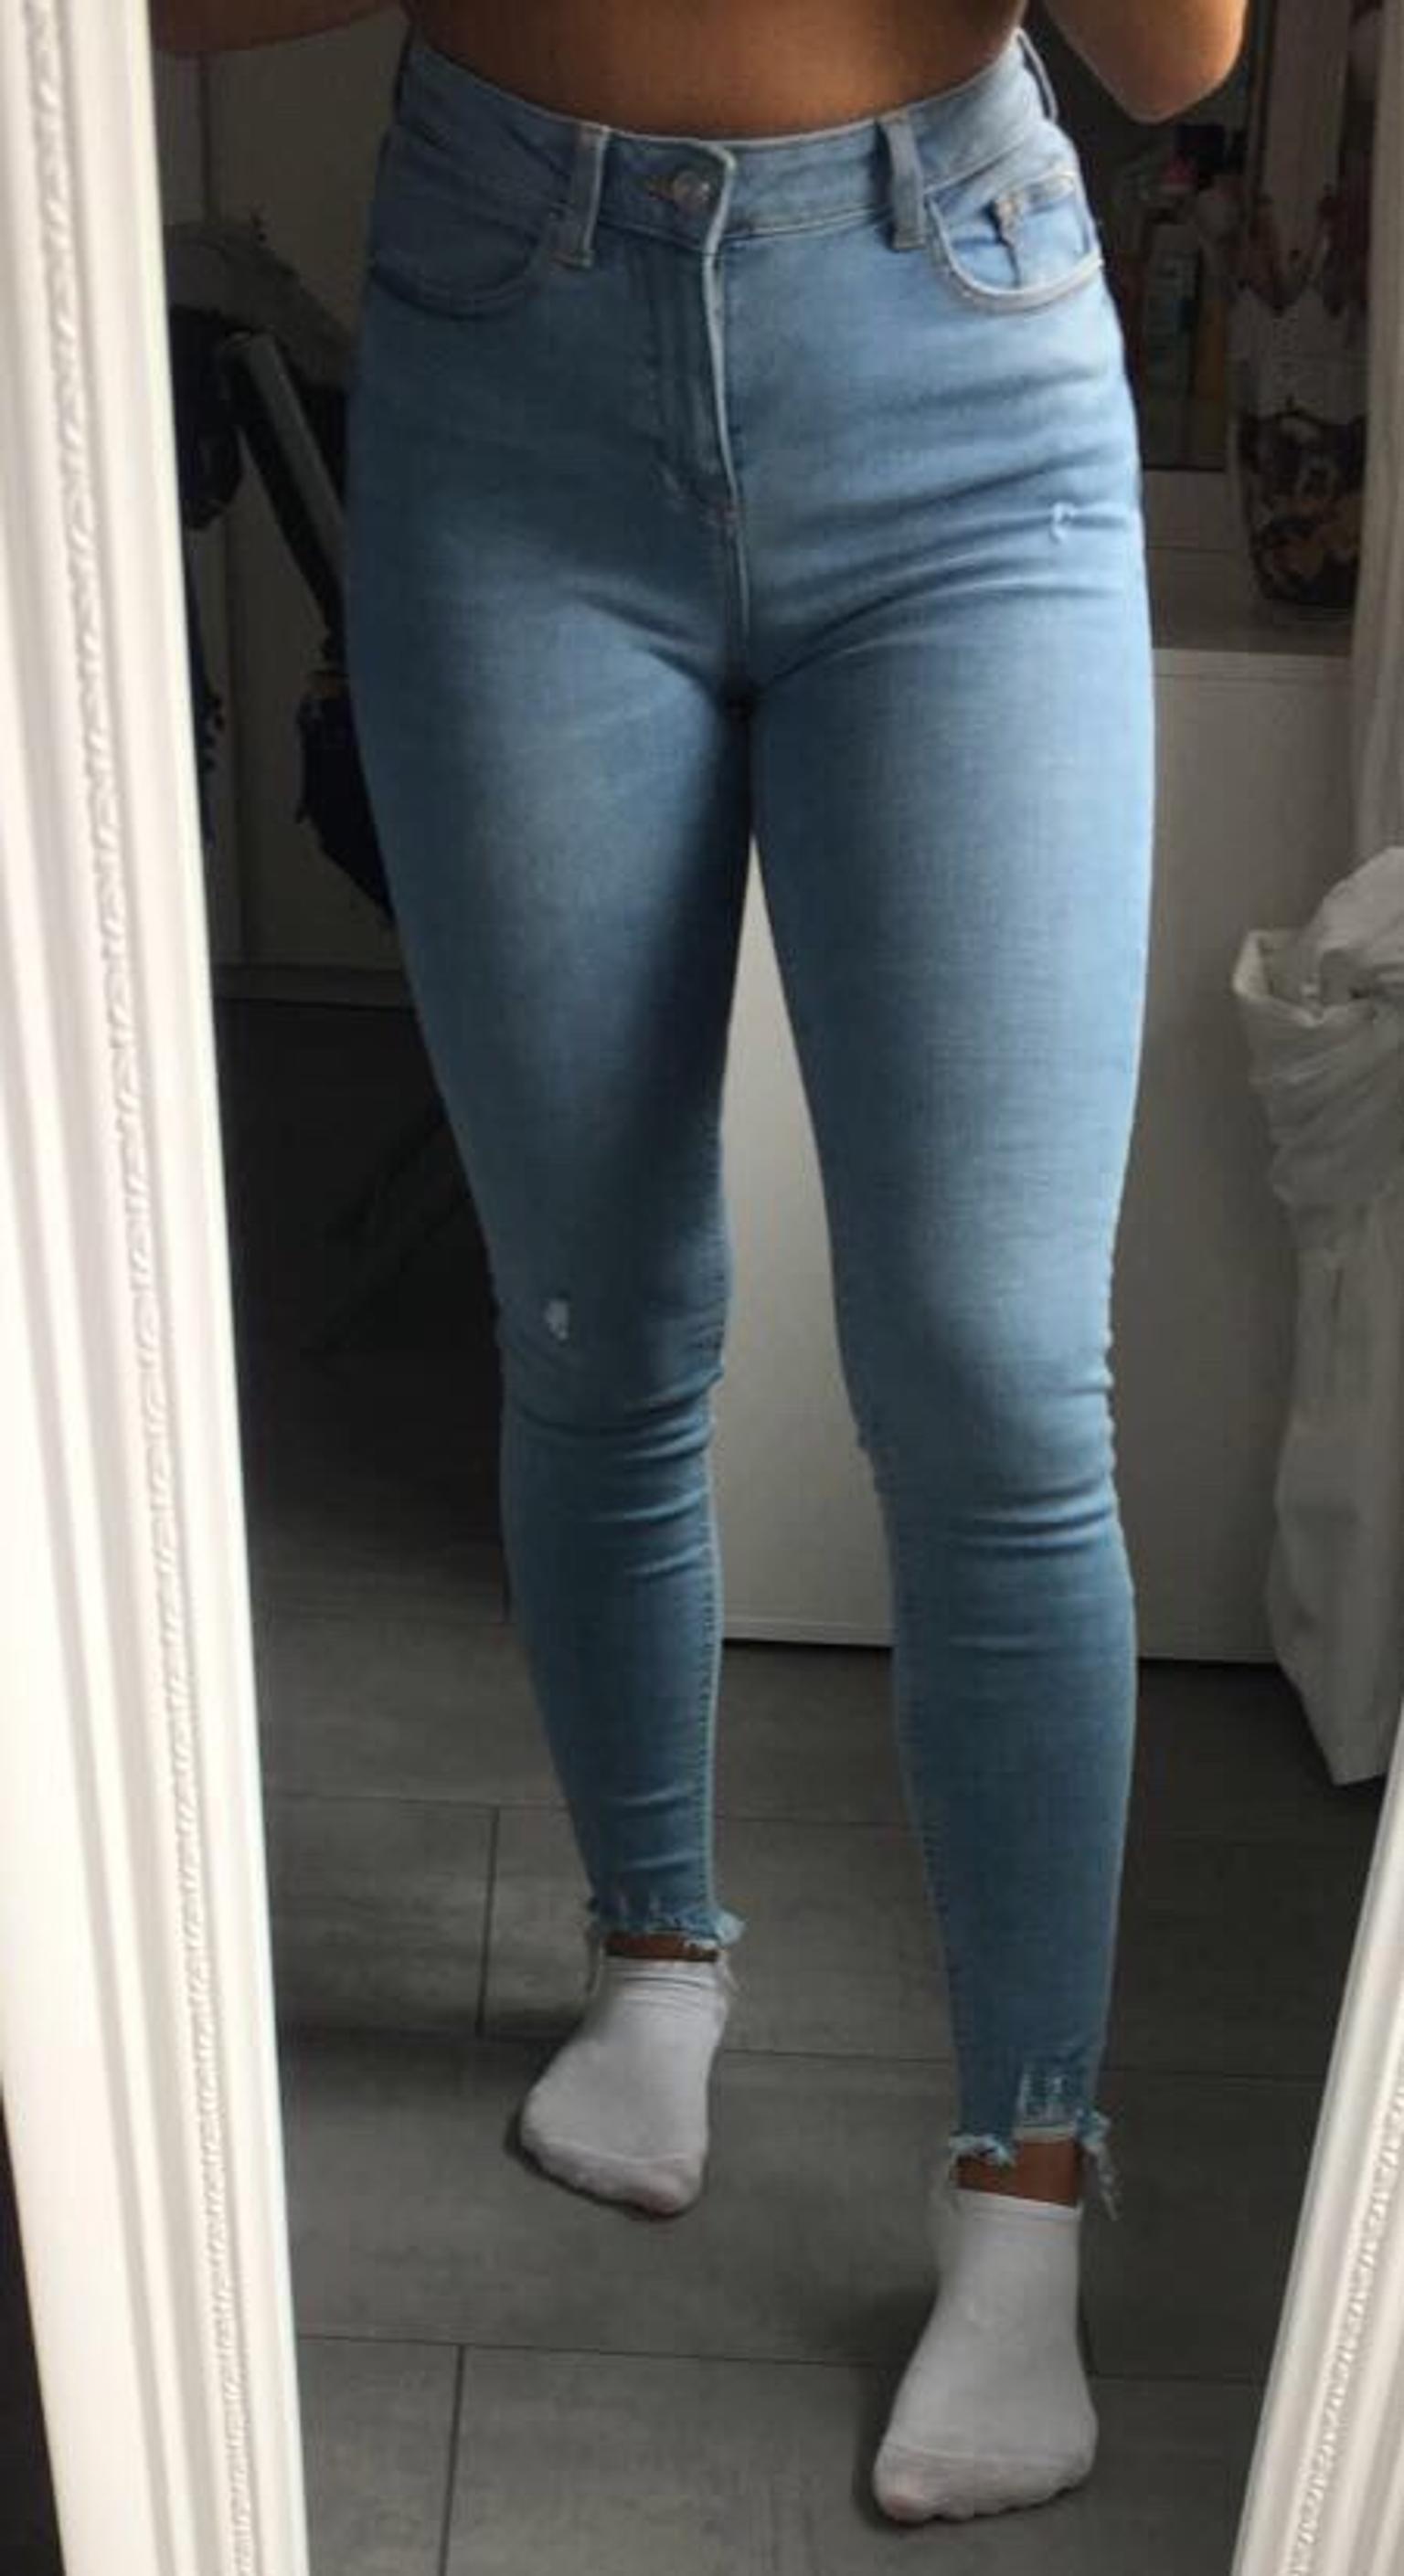 High Waist Jeans In 539 Schwerte For 15 00 For Sale Shpock